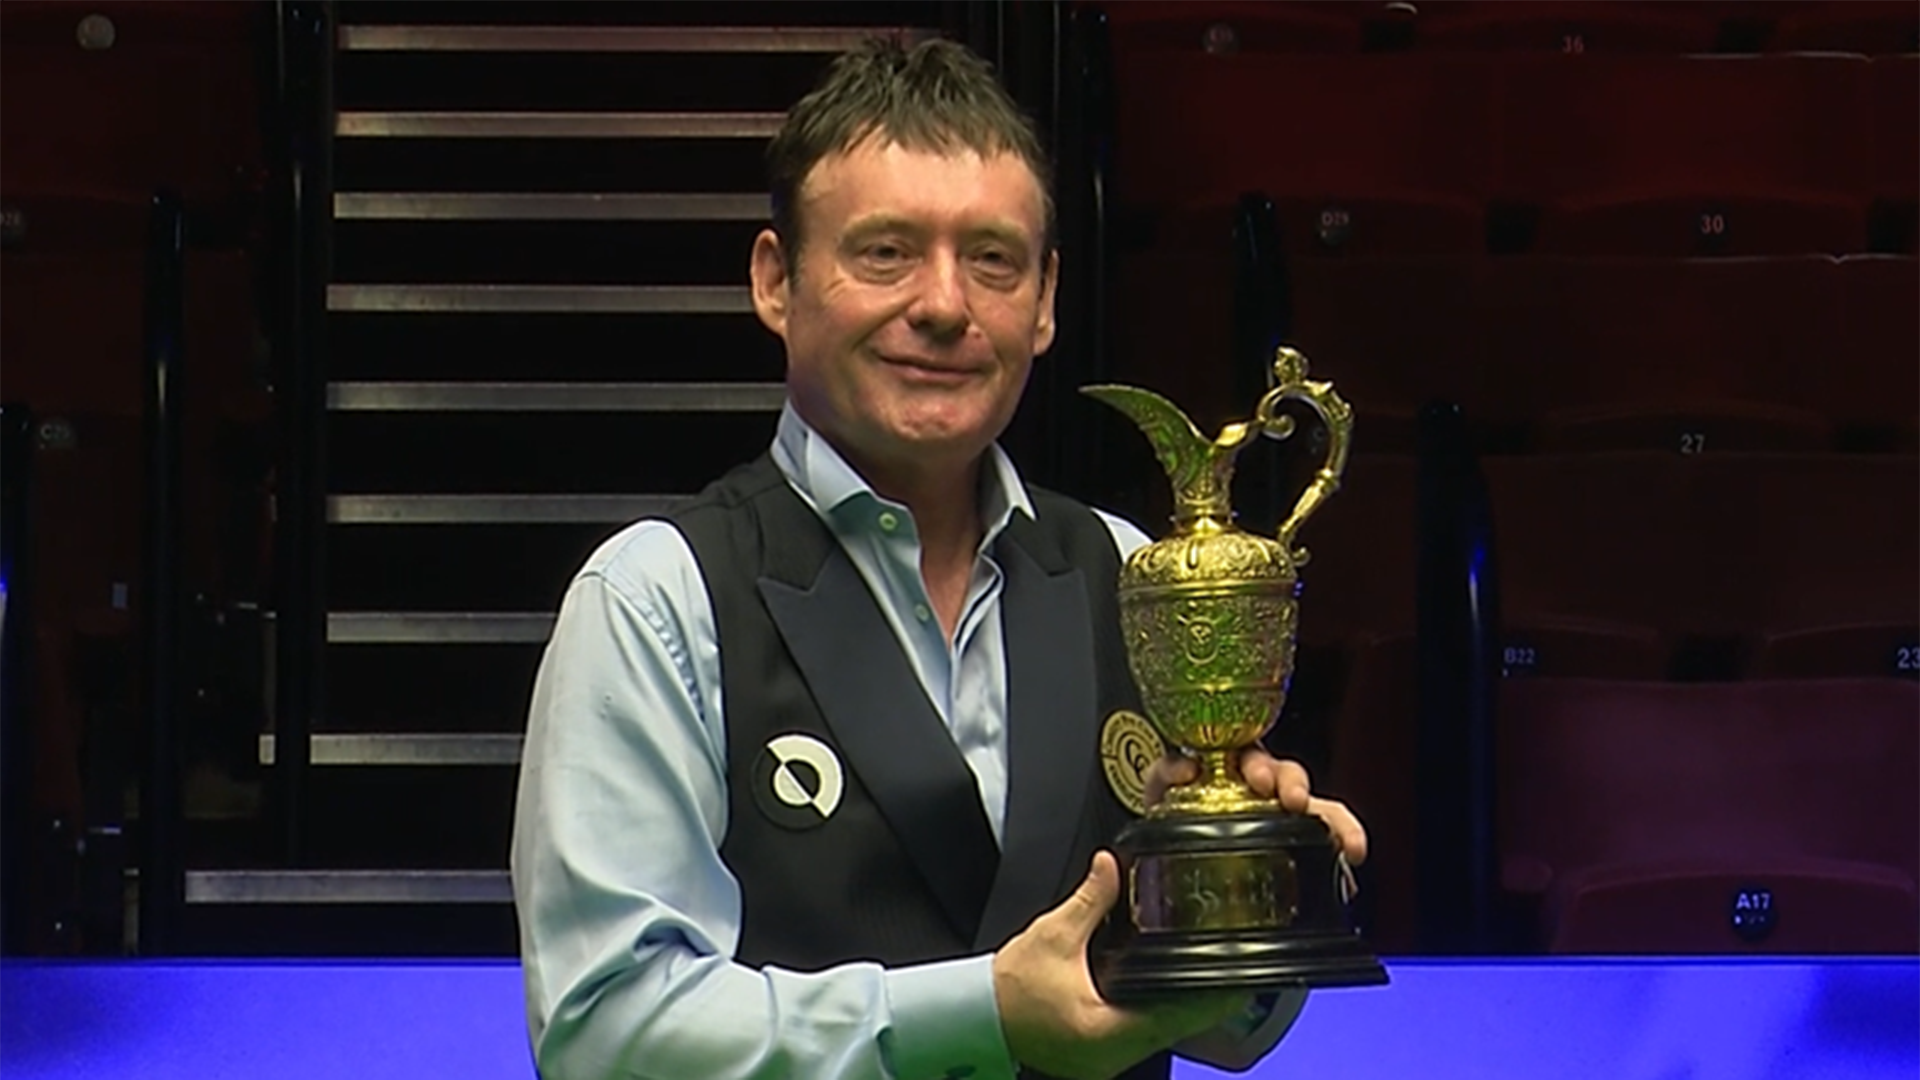 World Senior Snooker Championship Jimmy White defeats Stephen Hendry and retains title at the Crucible